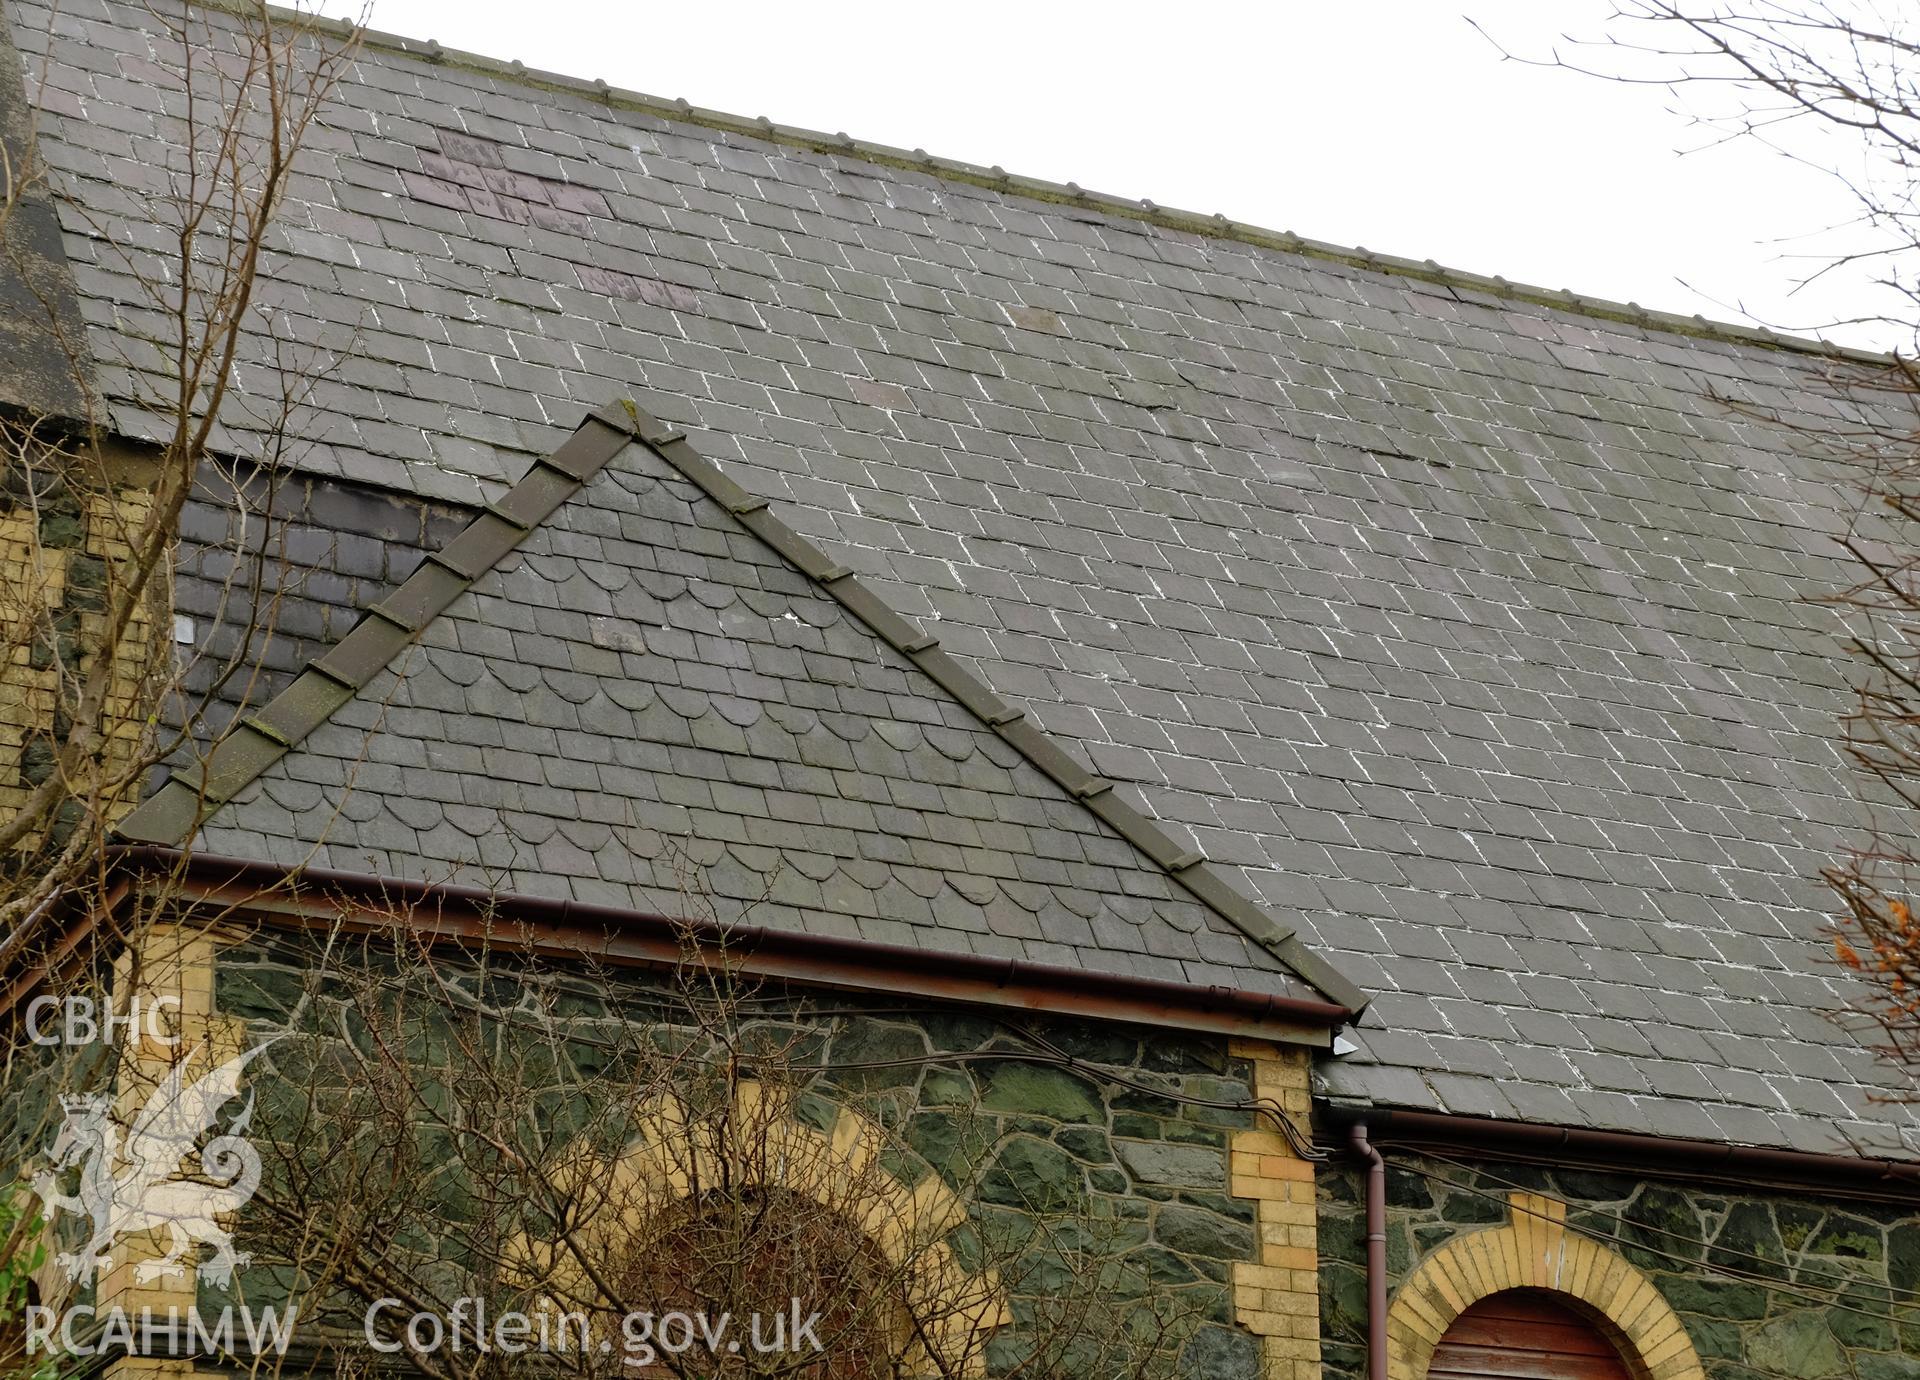 Colour photograph showing detail of roof slates at Capel Libanus, Clwt-y-Bont, Deiniolen, produced by Richard Hayman 2nd March 2017